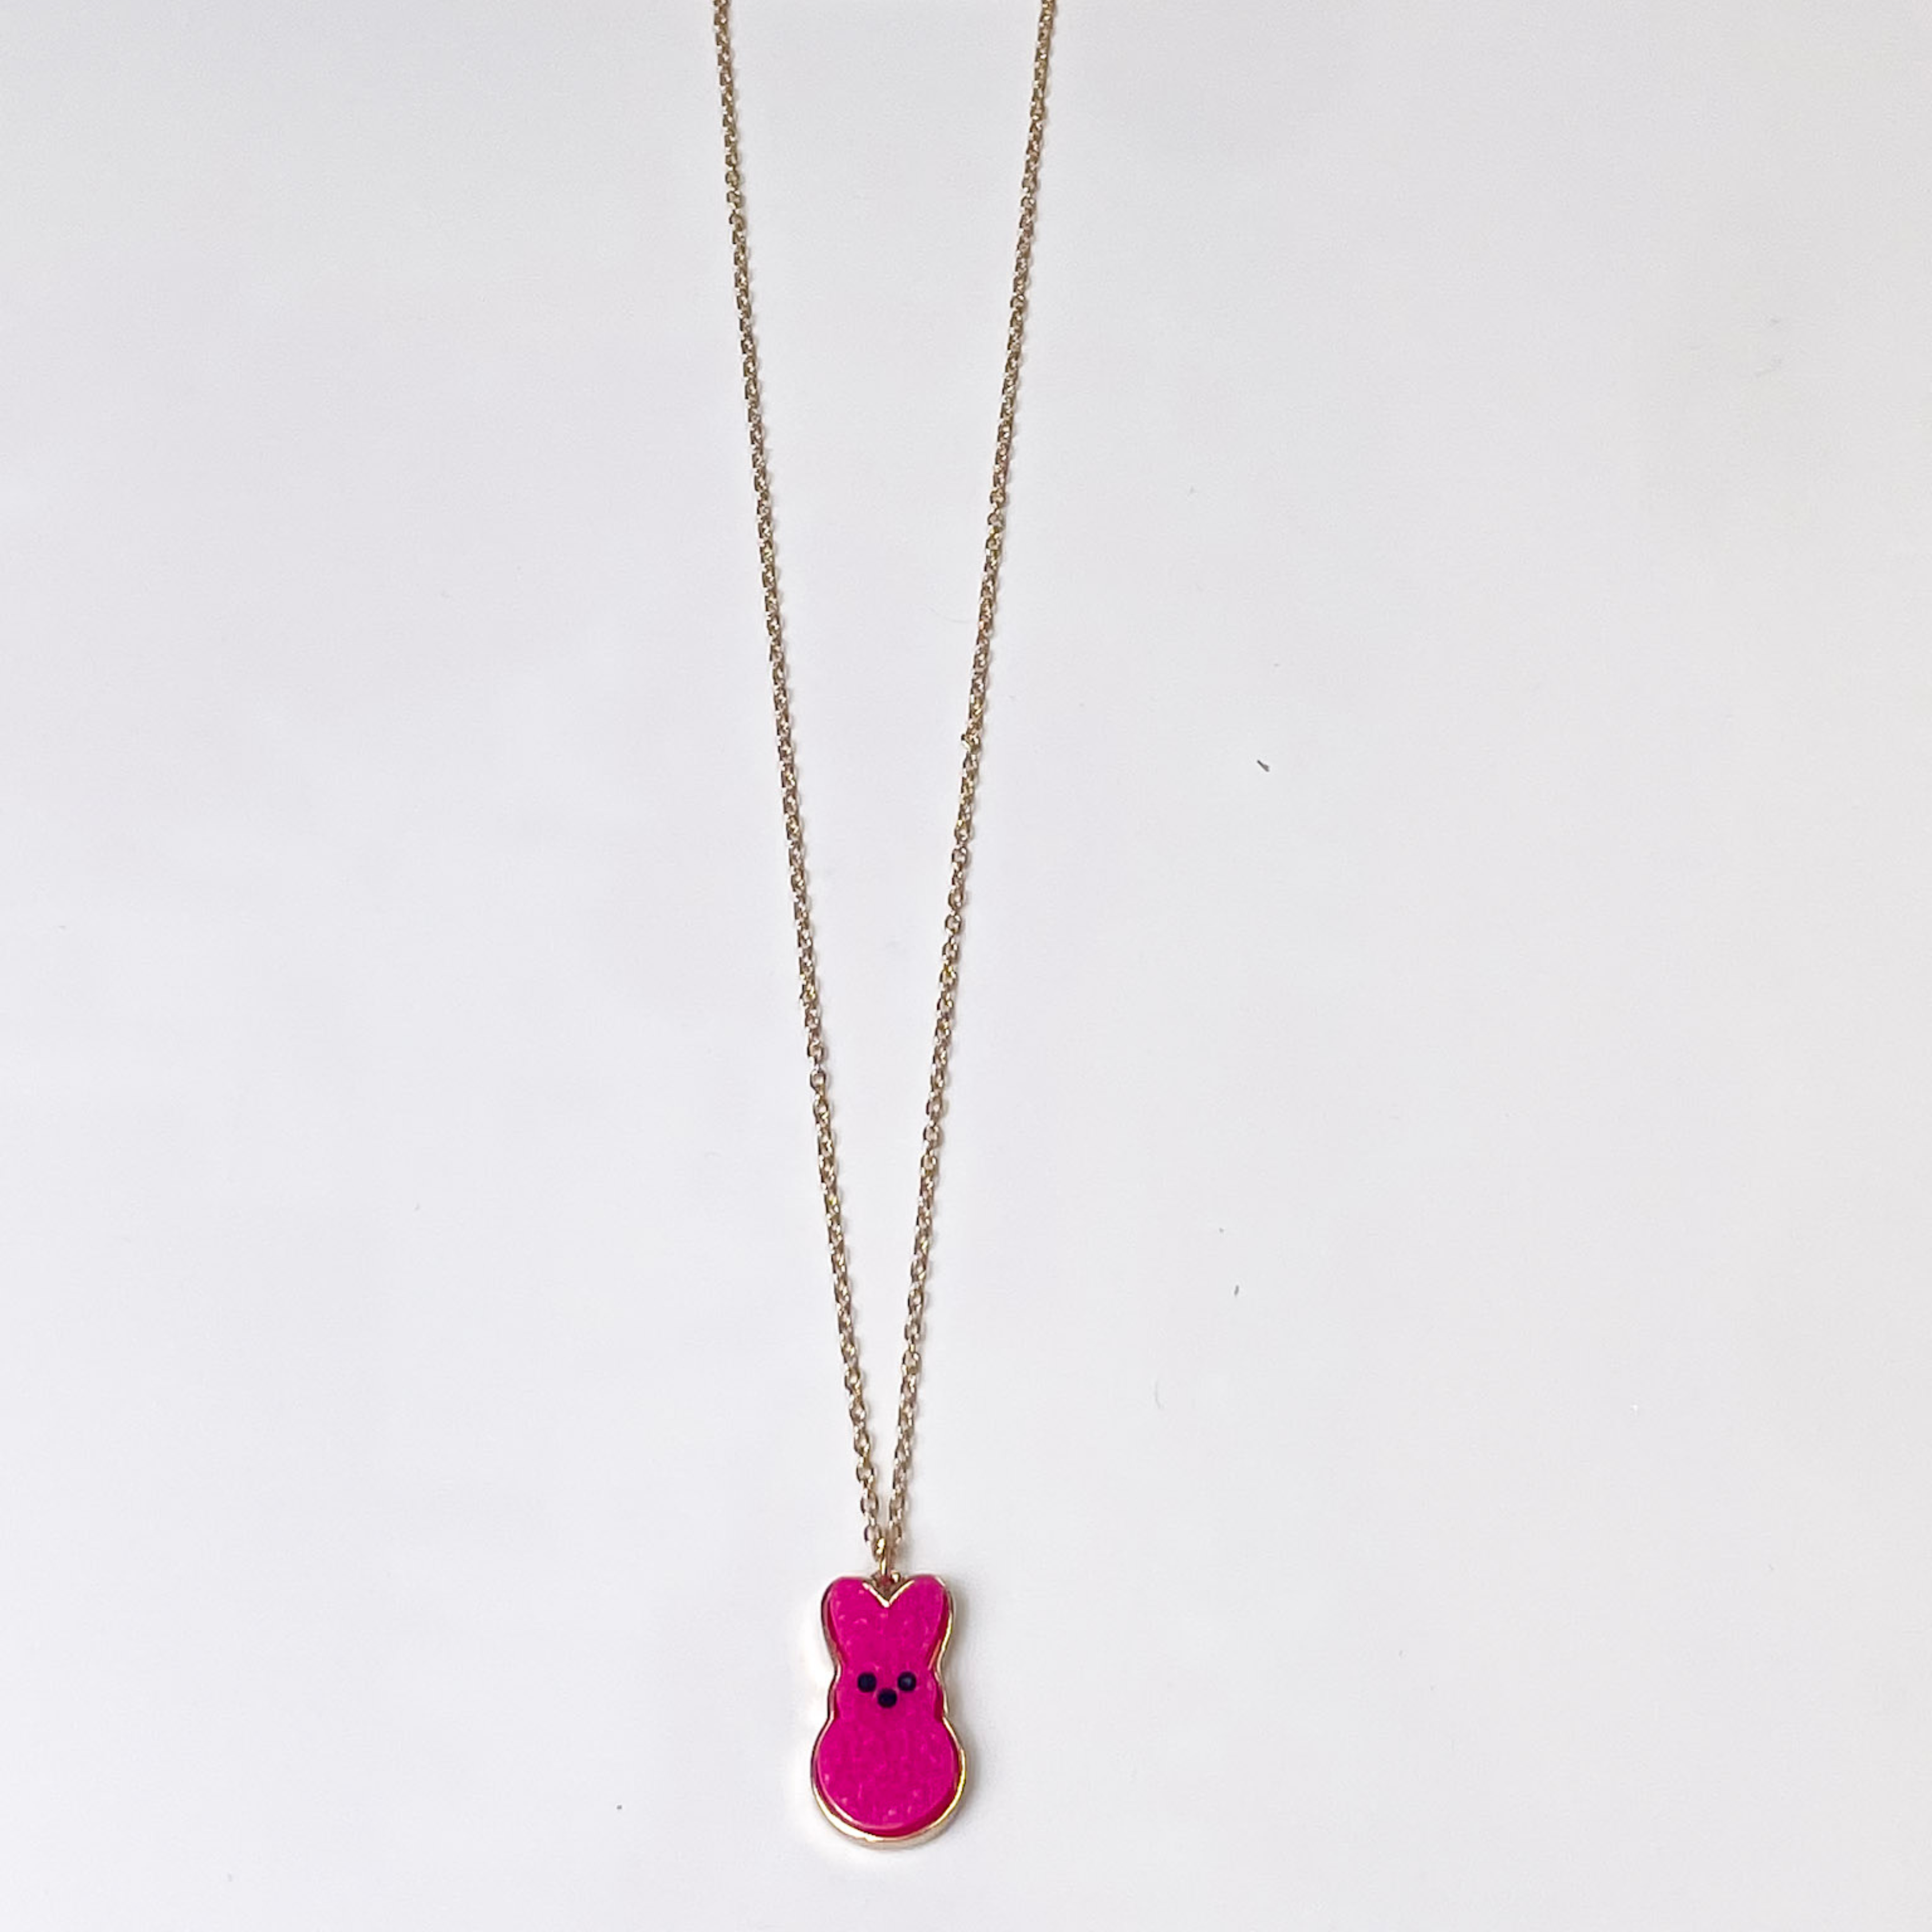 Gold Chain Necklace with Bunny Pendant in Hot Pink - Giddy Up Glamour Boutique